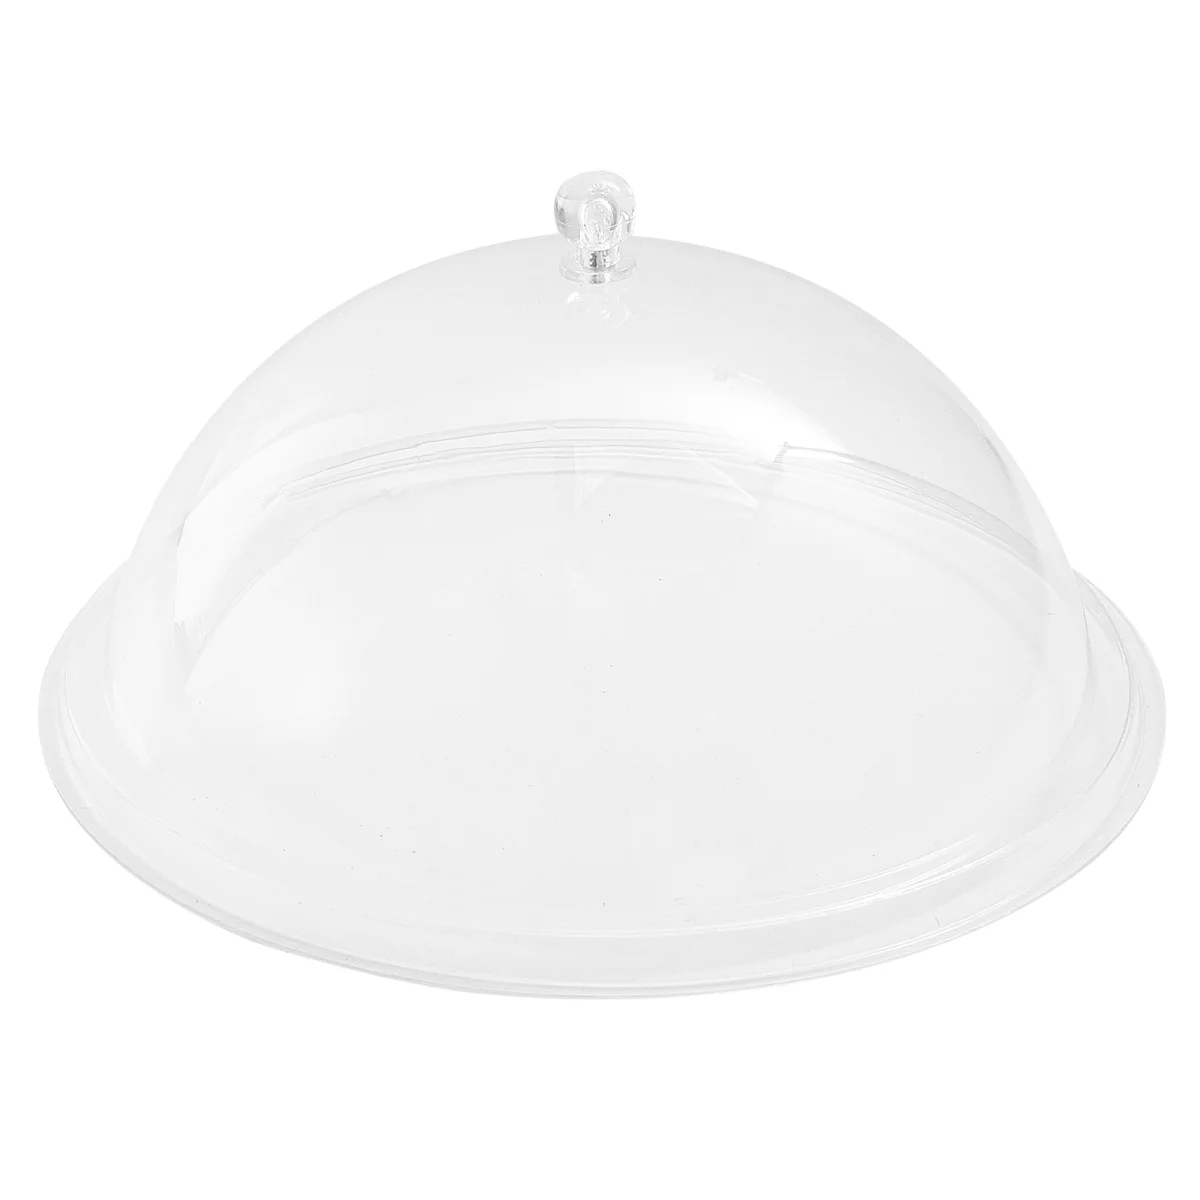 Cover Food Microwave Plate Cake Lid Dome Splatter Serving Clear Guard Protector Dish Covers Anti Tent Display Dessert, Size: 26.5X26.5X10.5CM